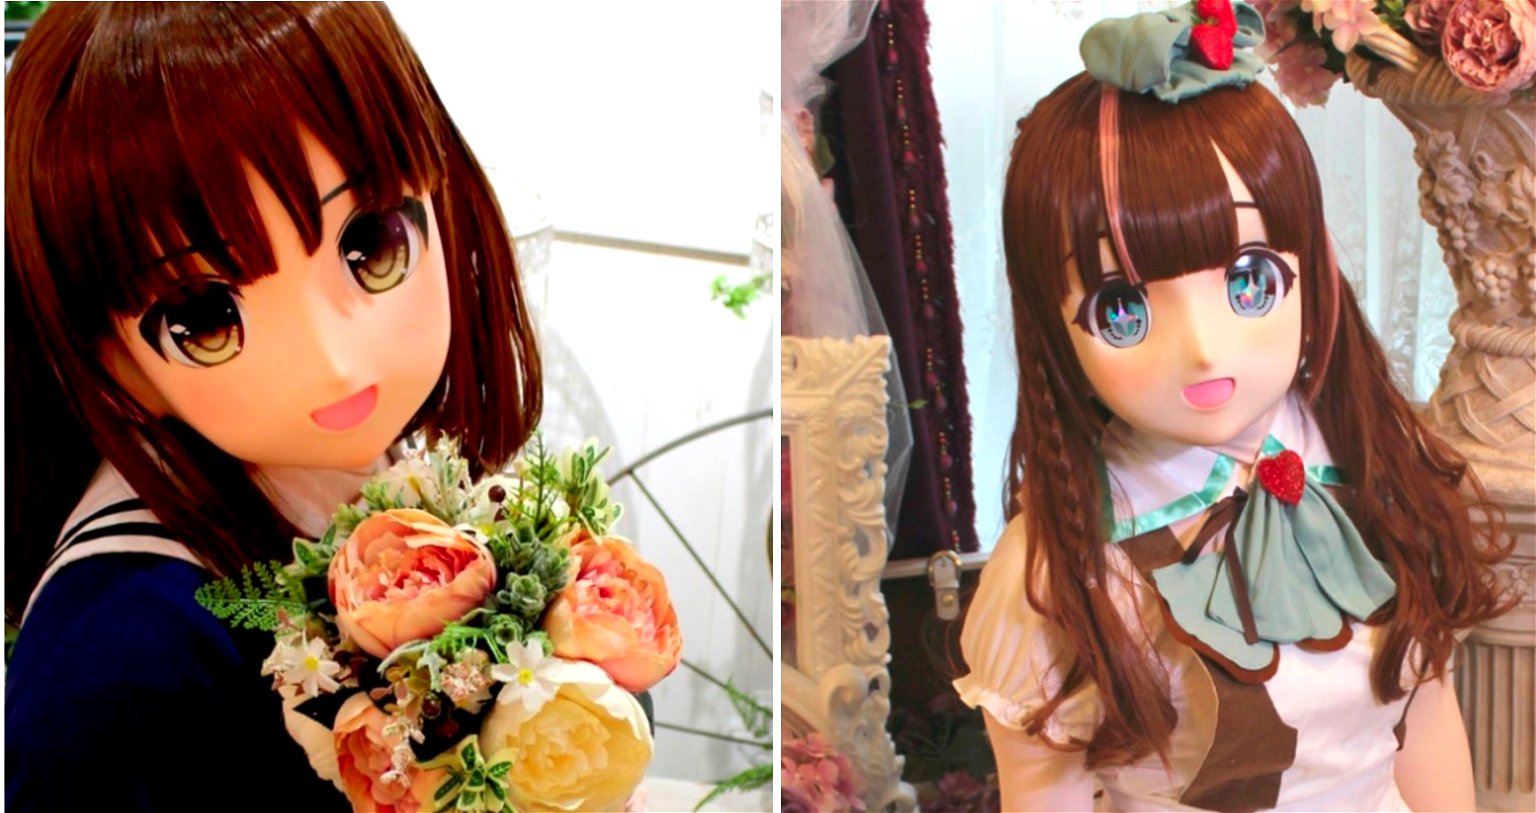 You Can Now Buy Scary Realistic Anime Girl Masks from Japan